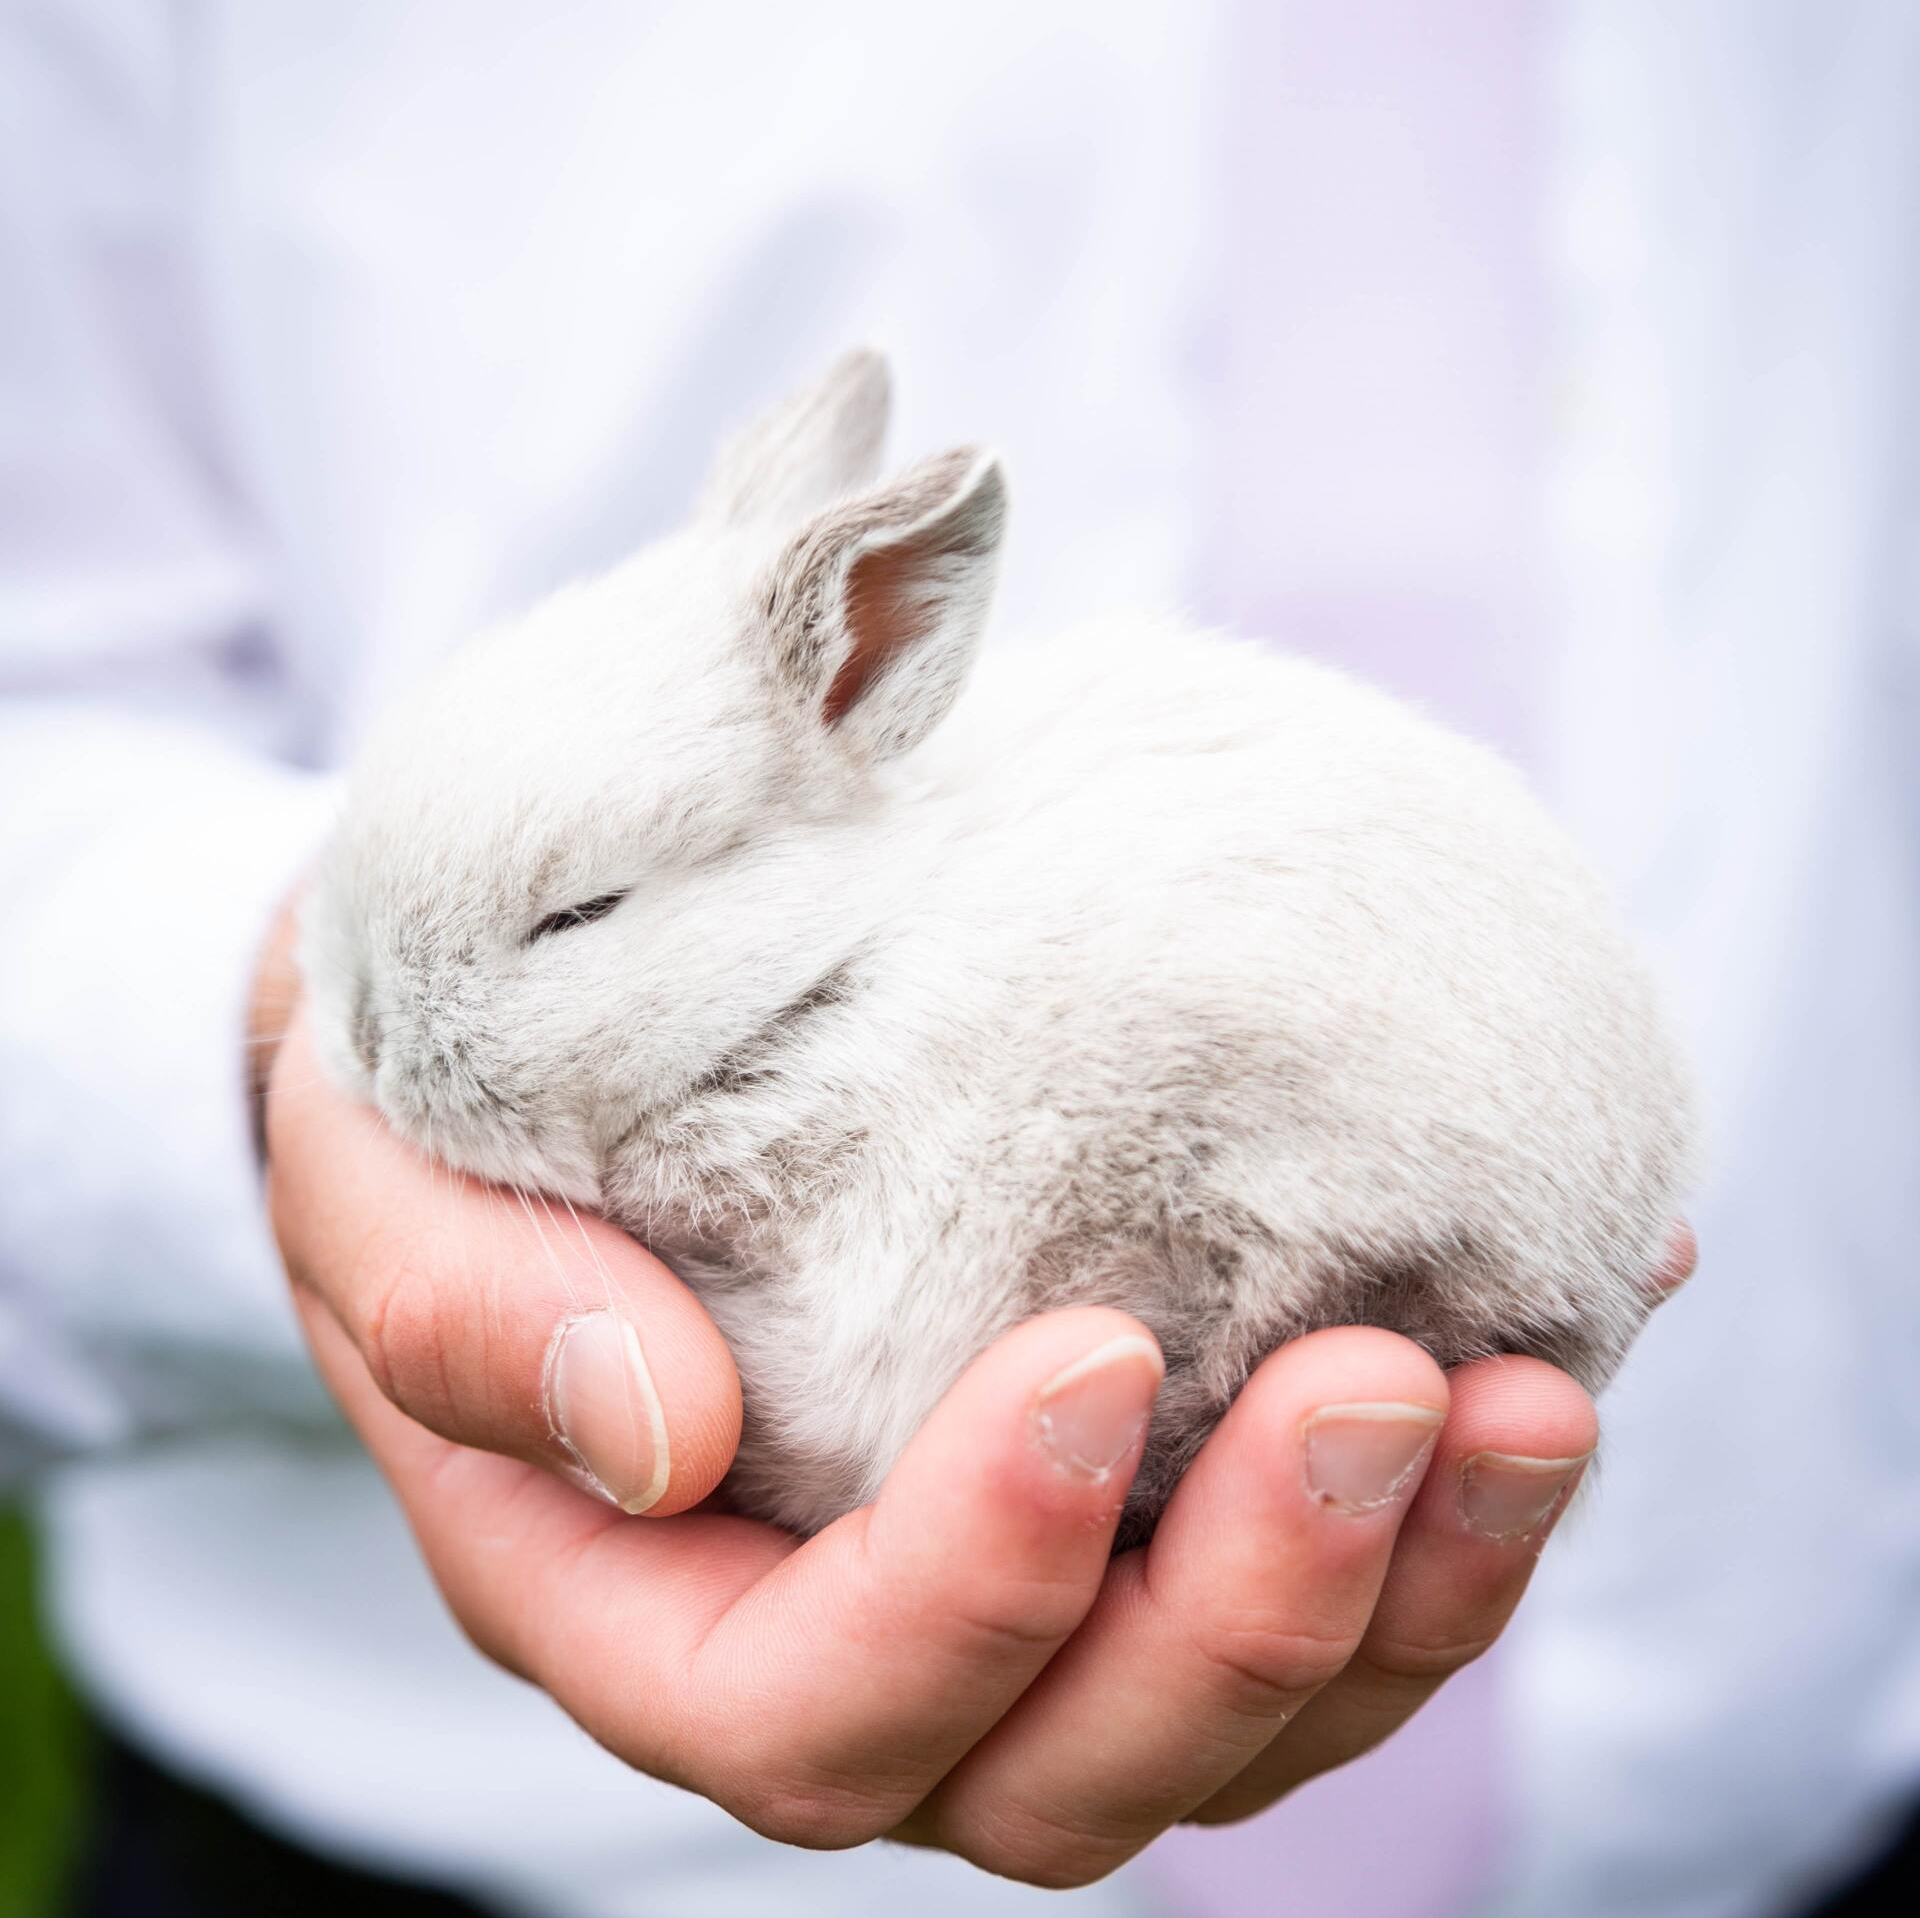 A person holding a leeping bunny